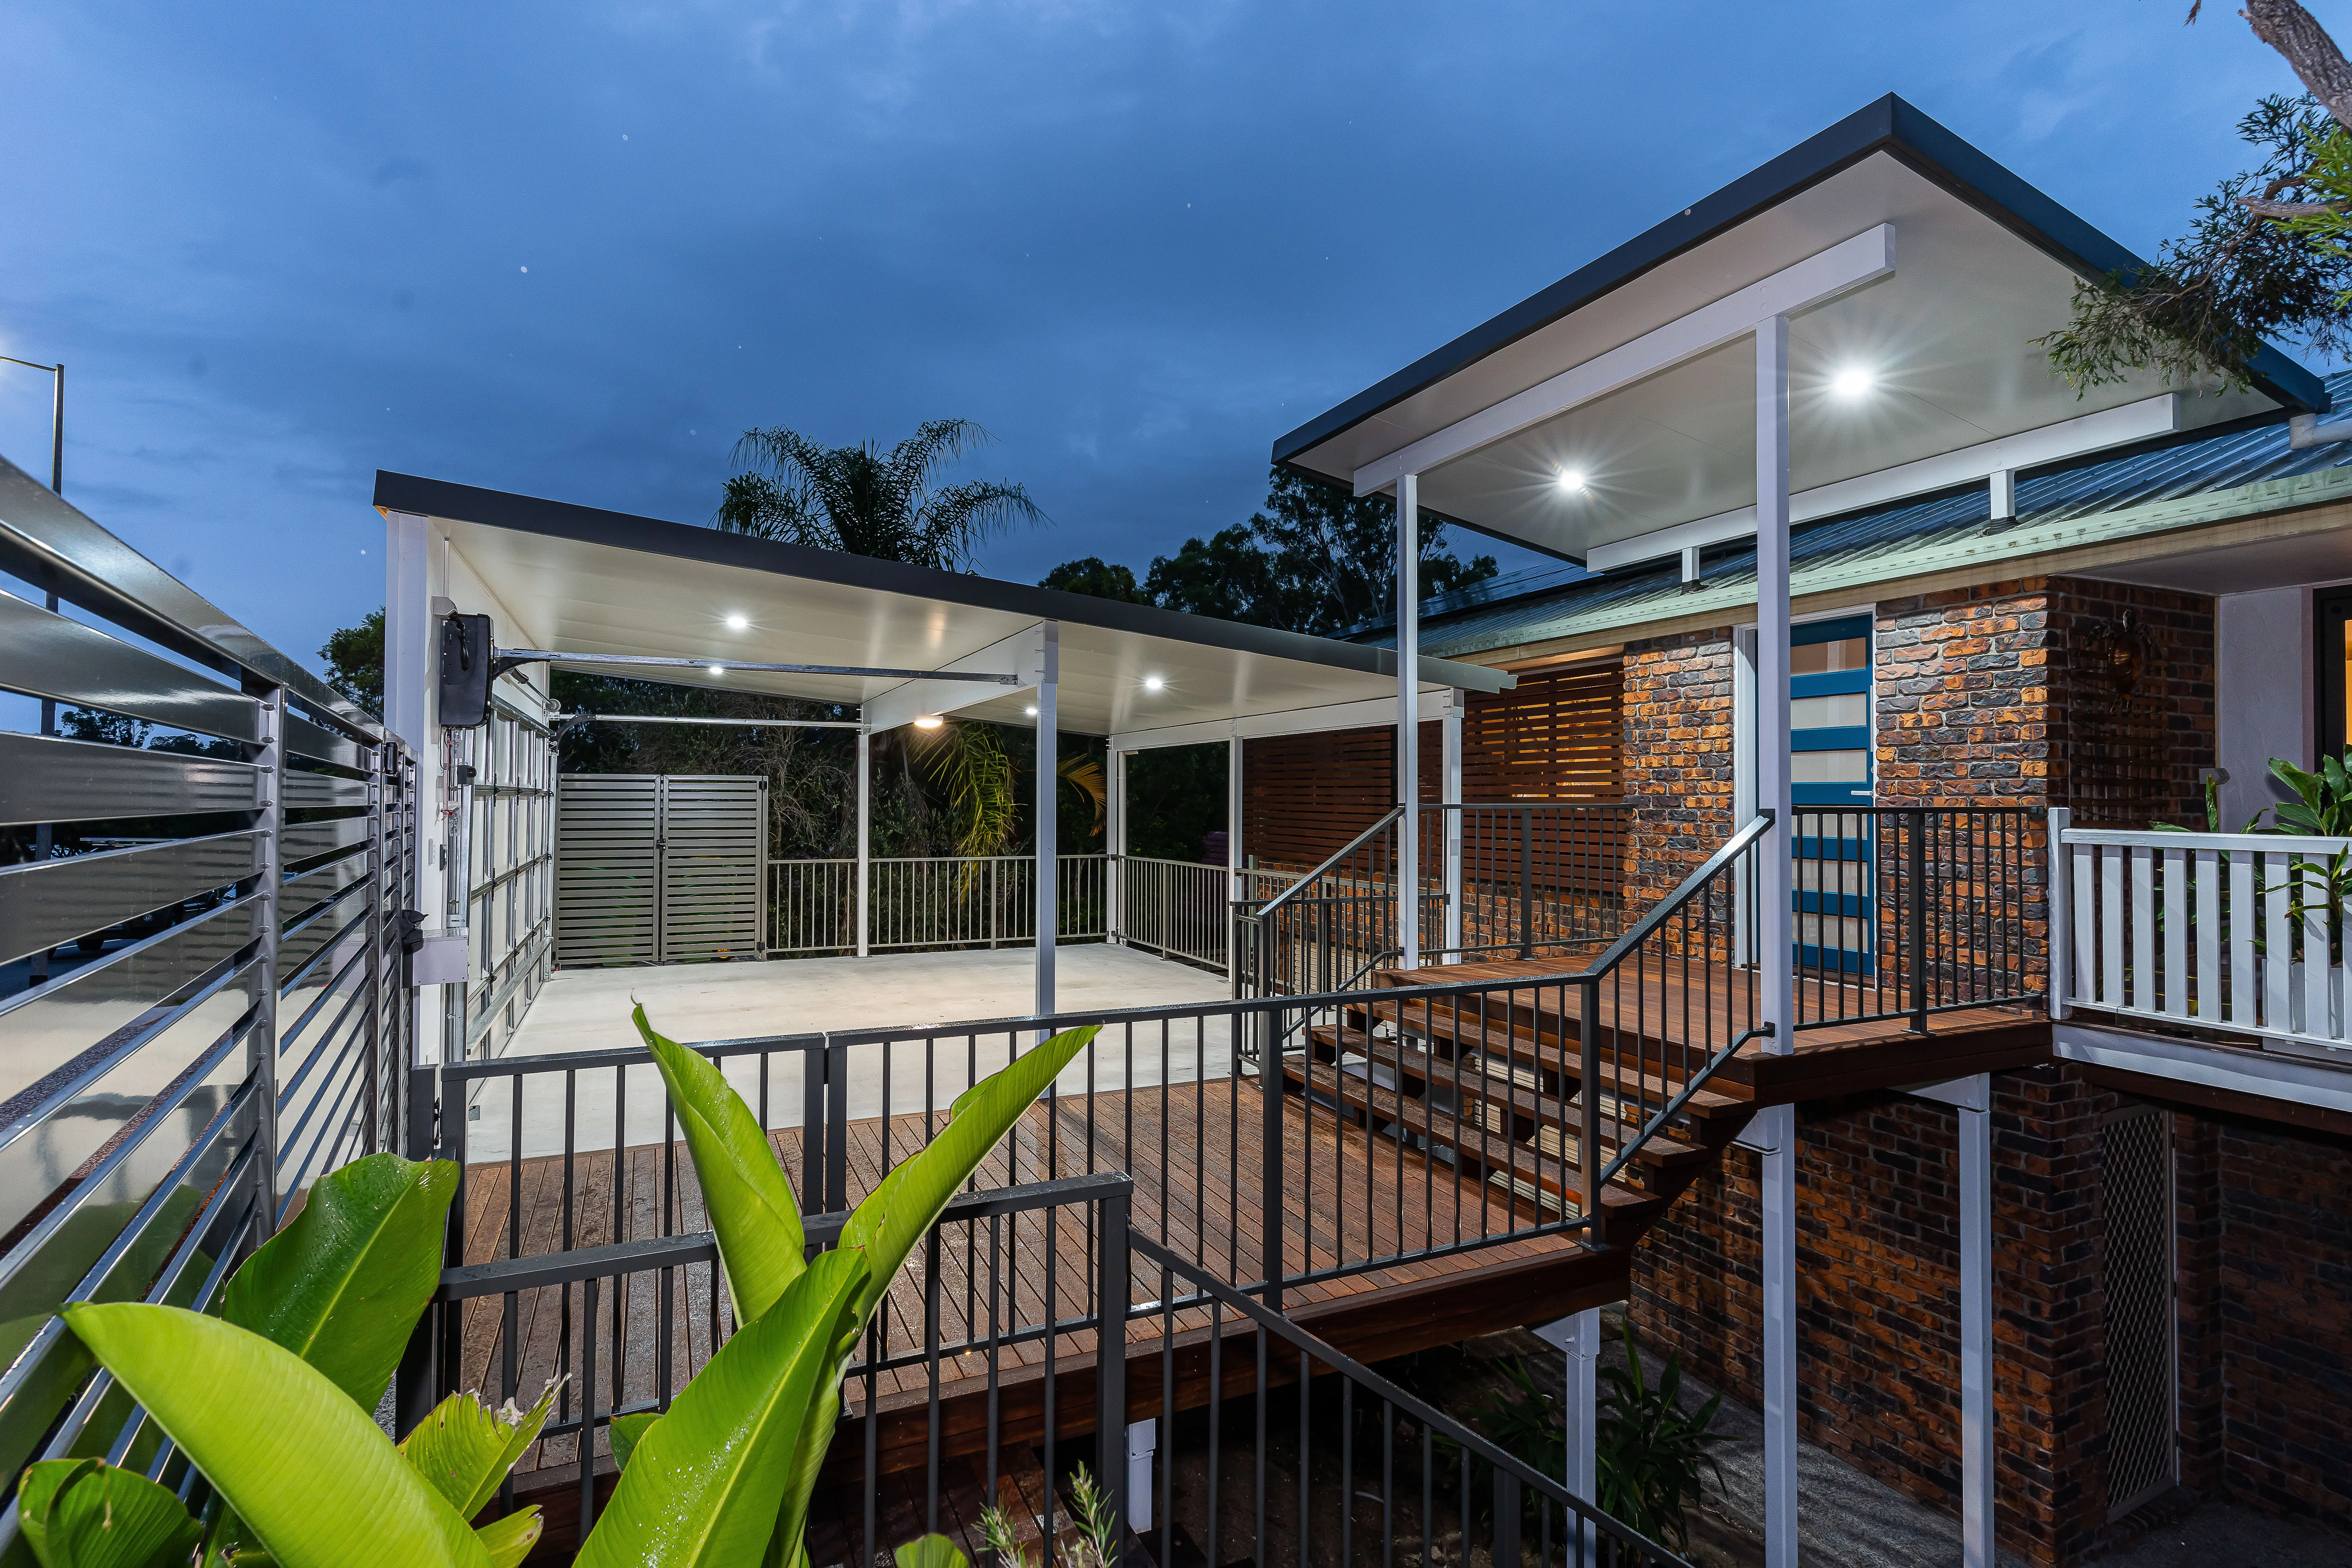 Front entry, deck and balustrade with Carport